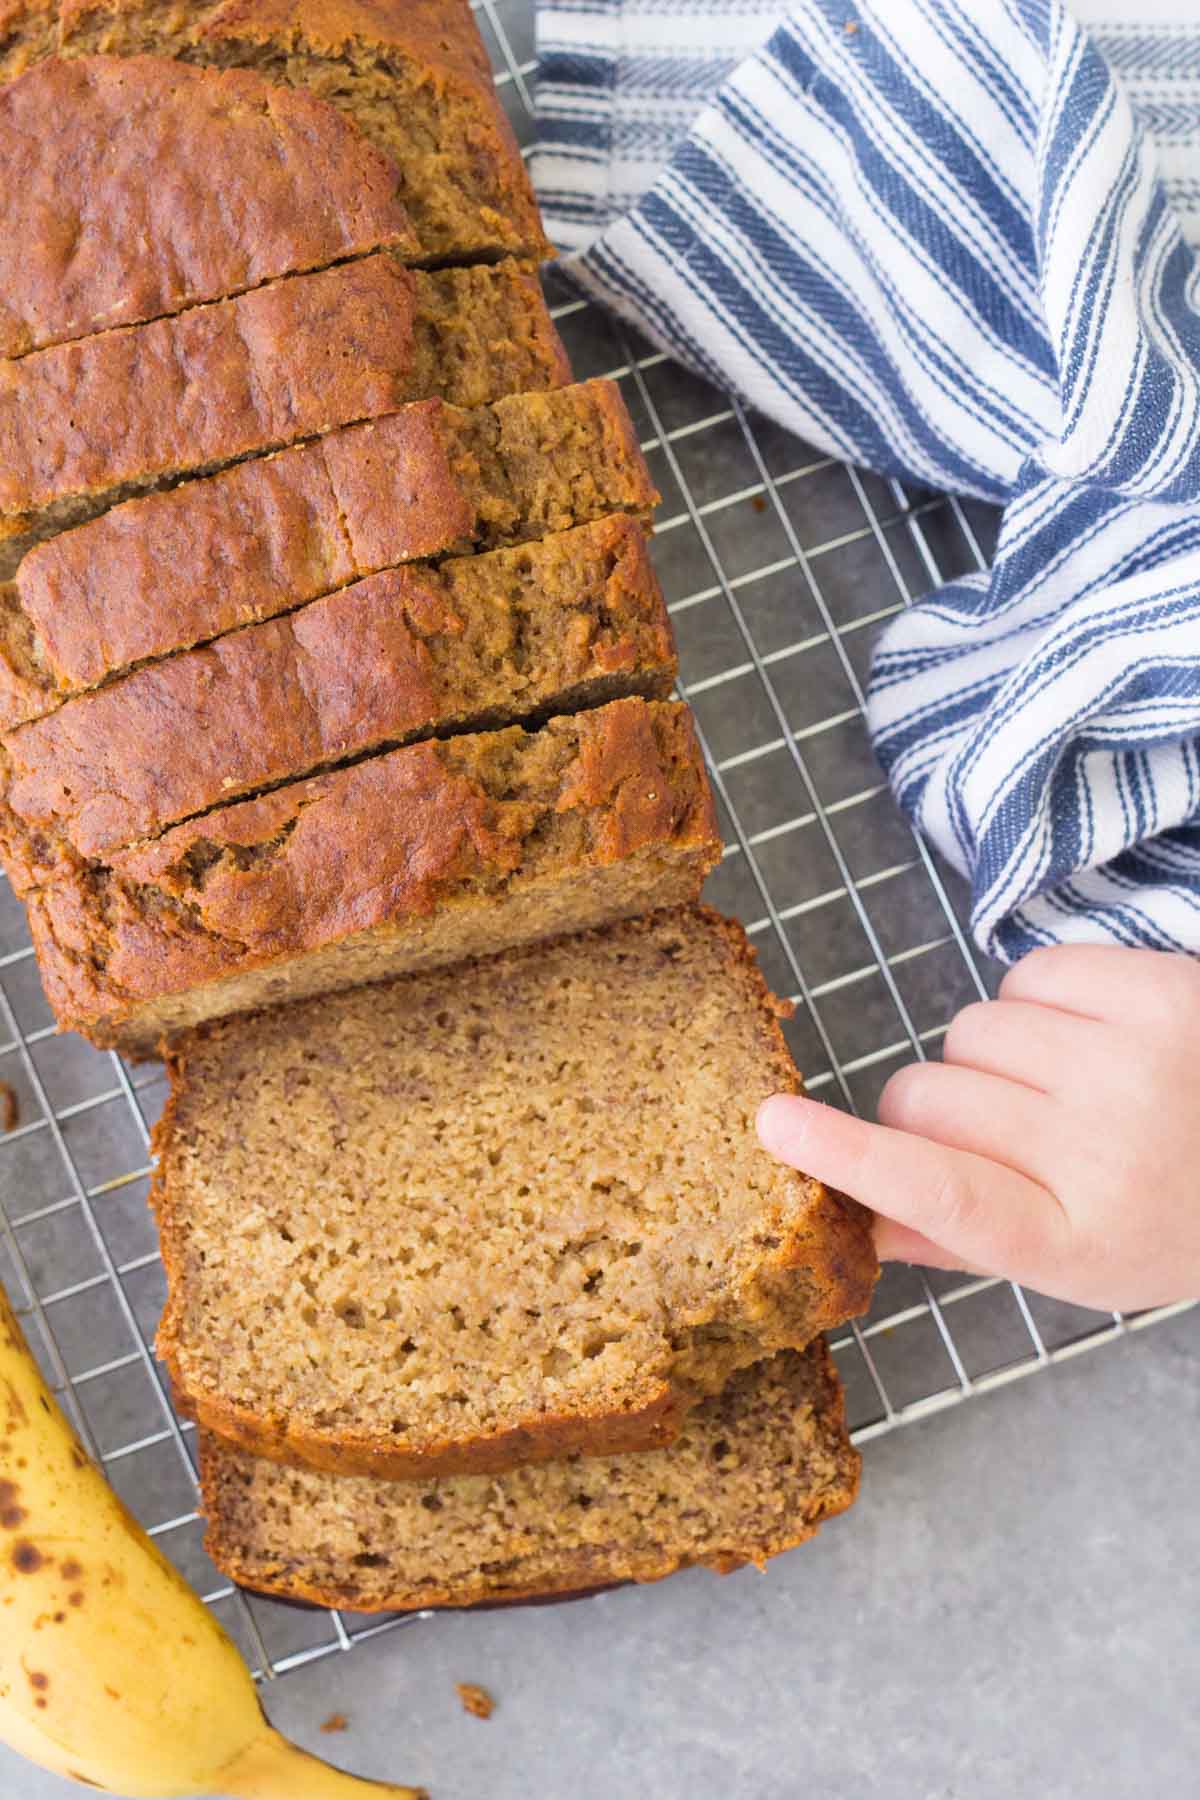 Child's hand grabbing a slice of healthy banana bread from the sliced loaf.